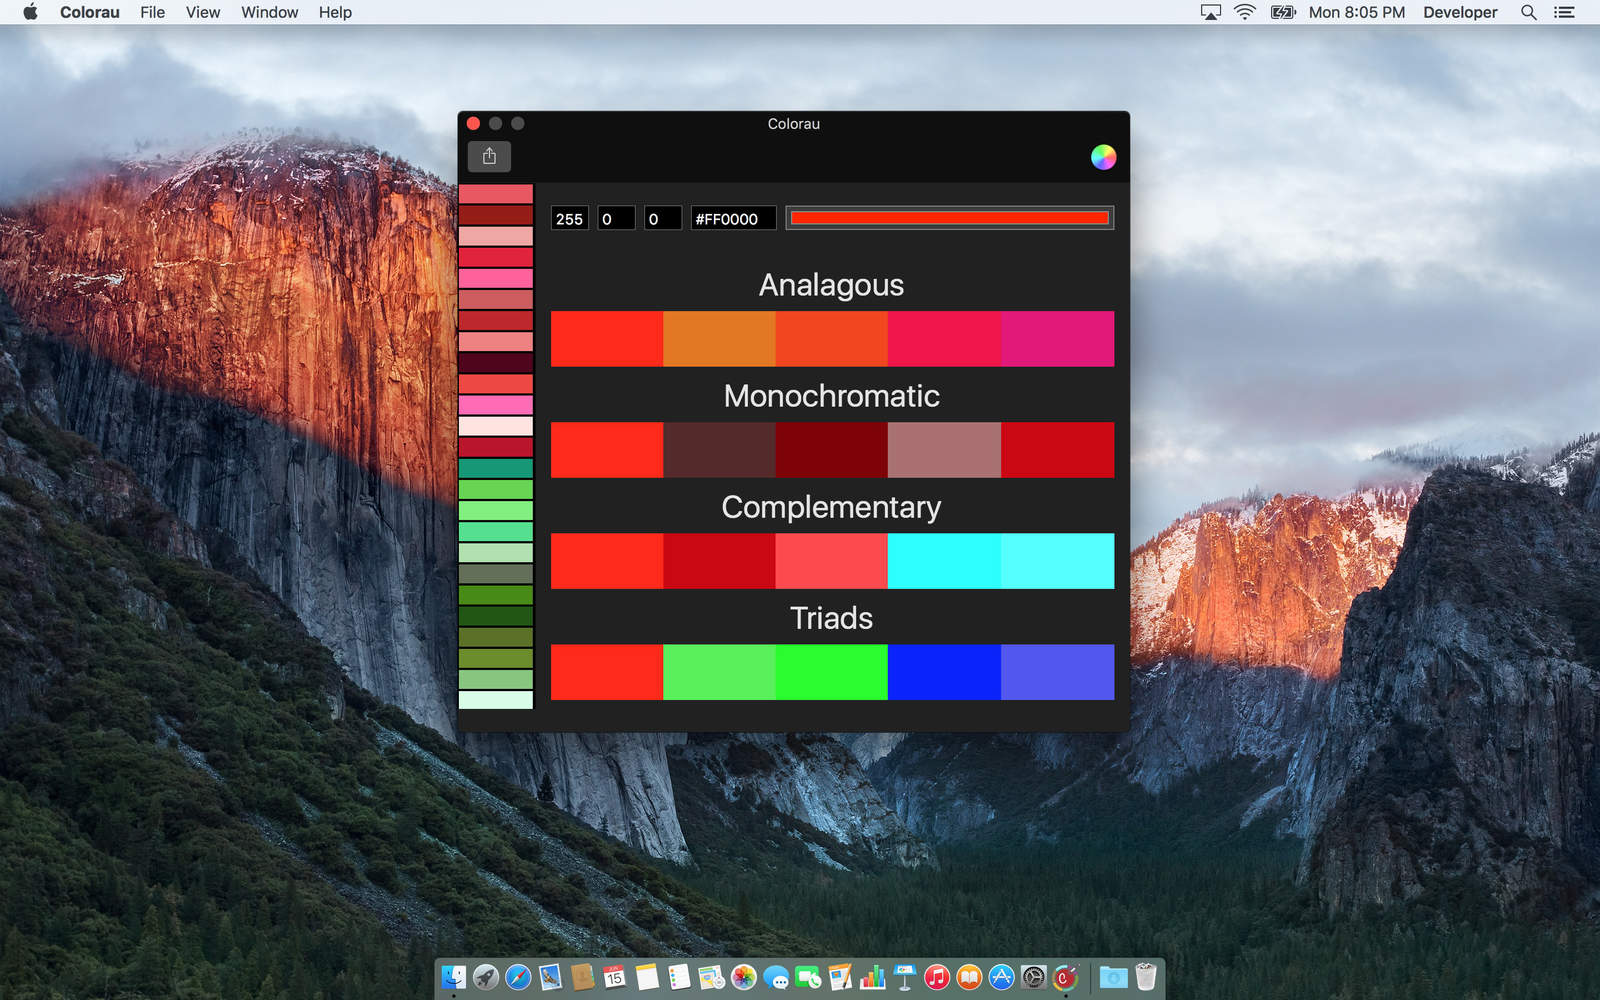 For developers: Colorau allows you to create color palettes and export them to code